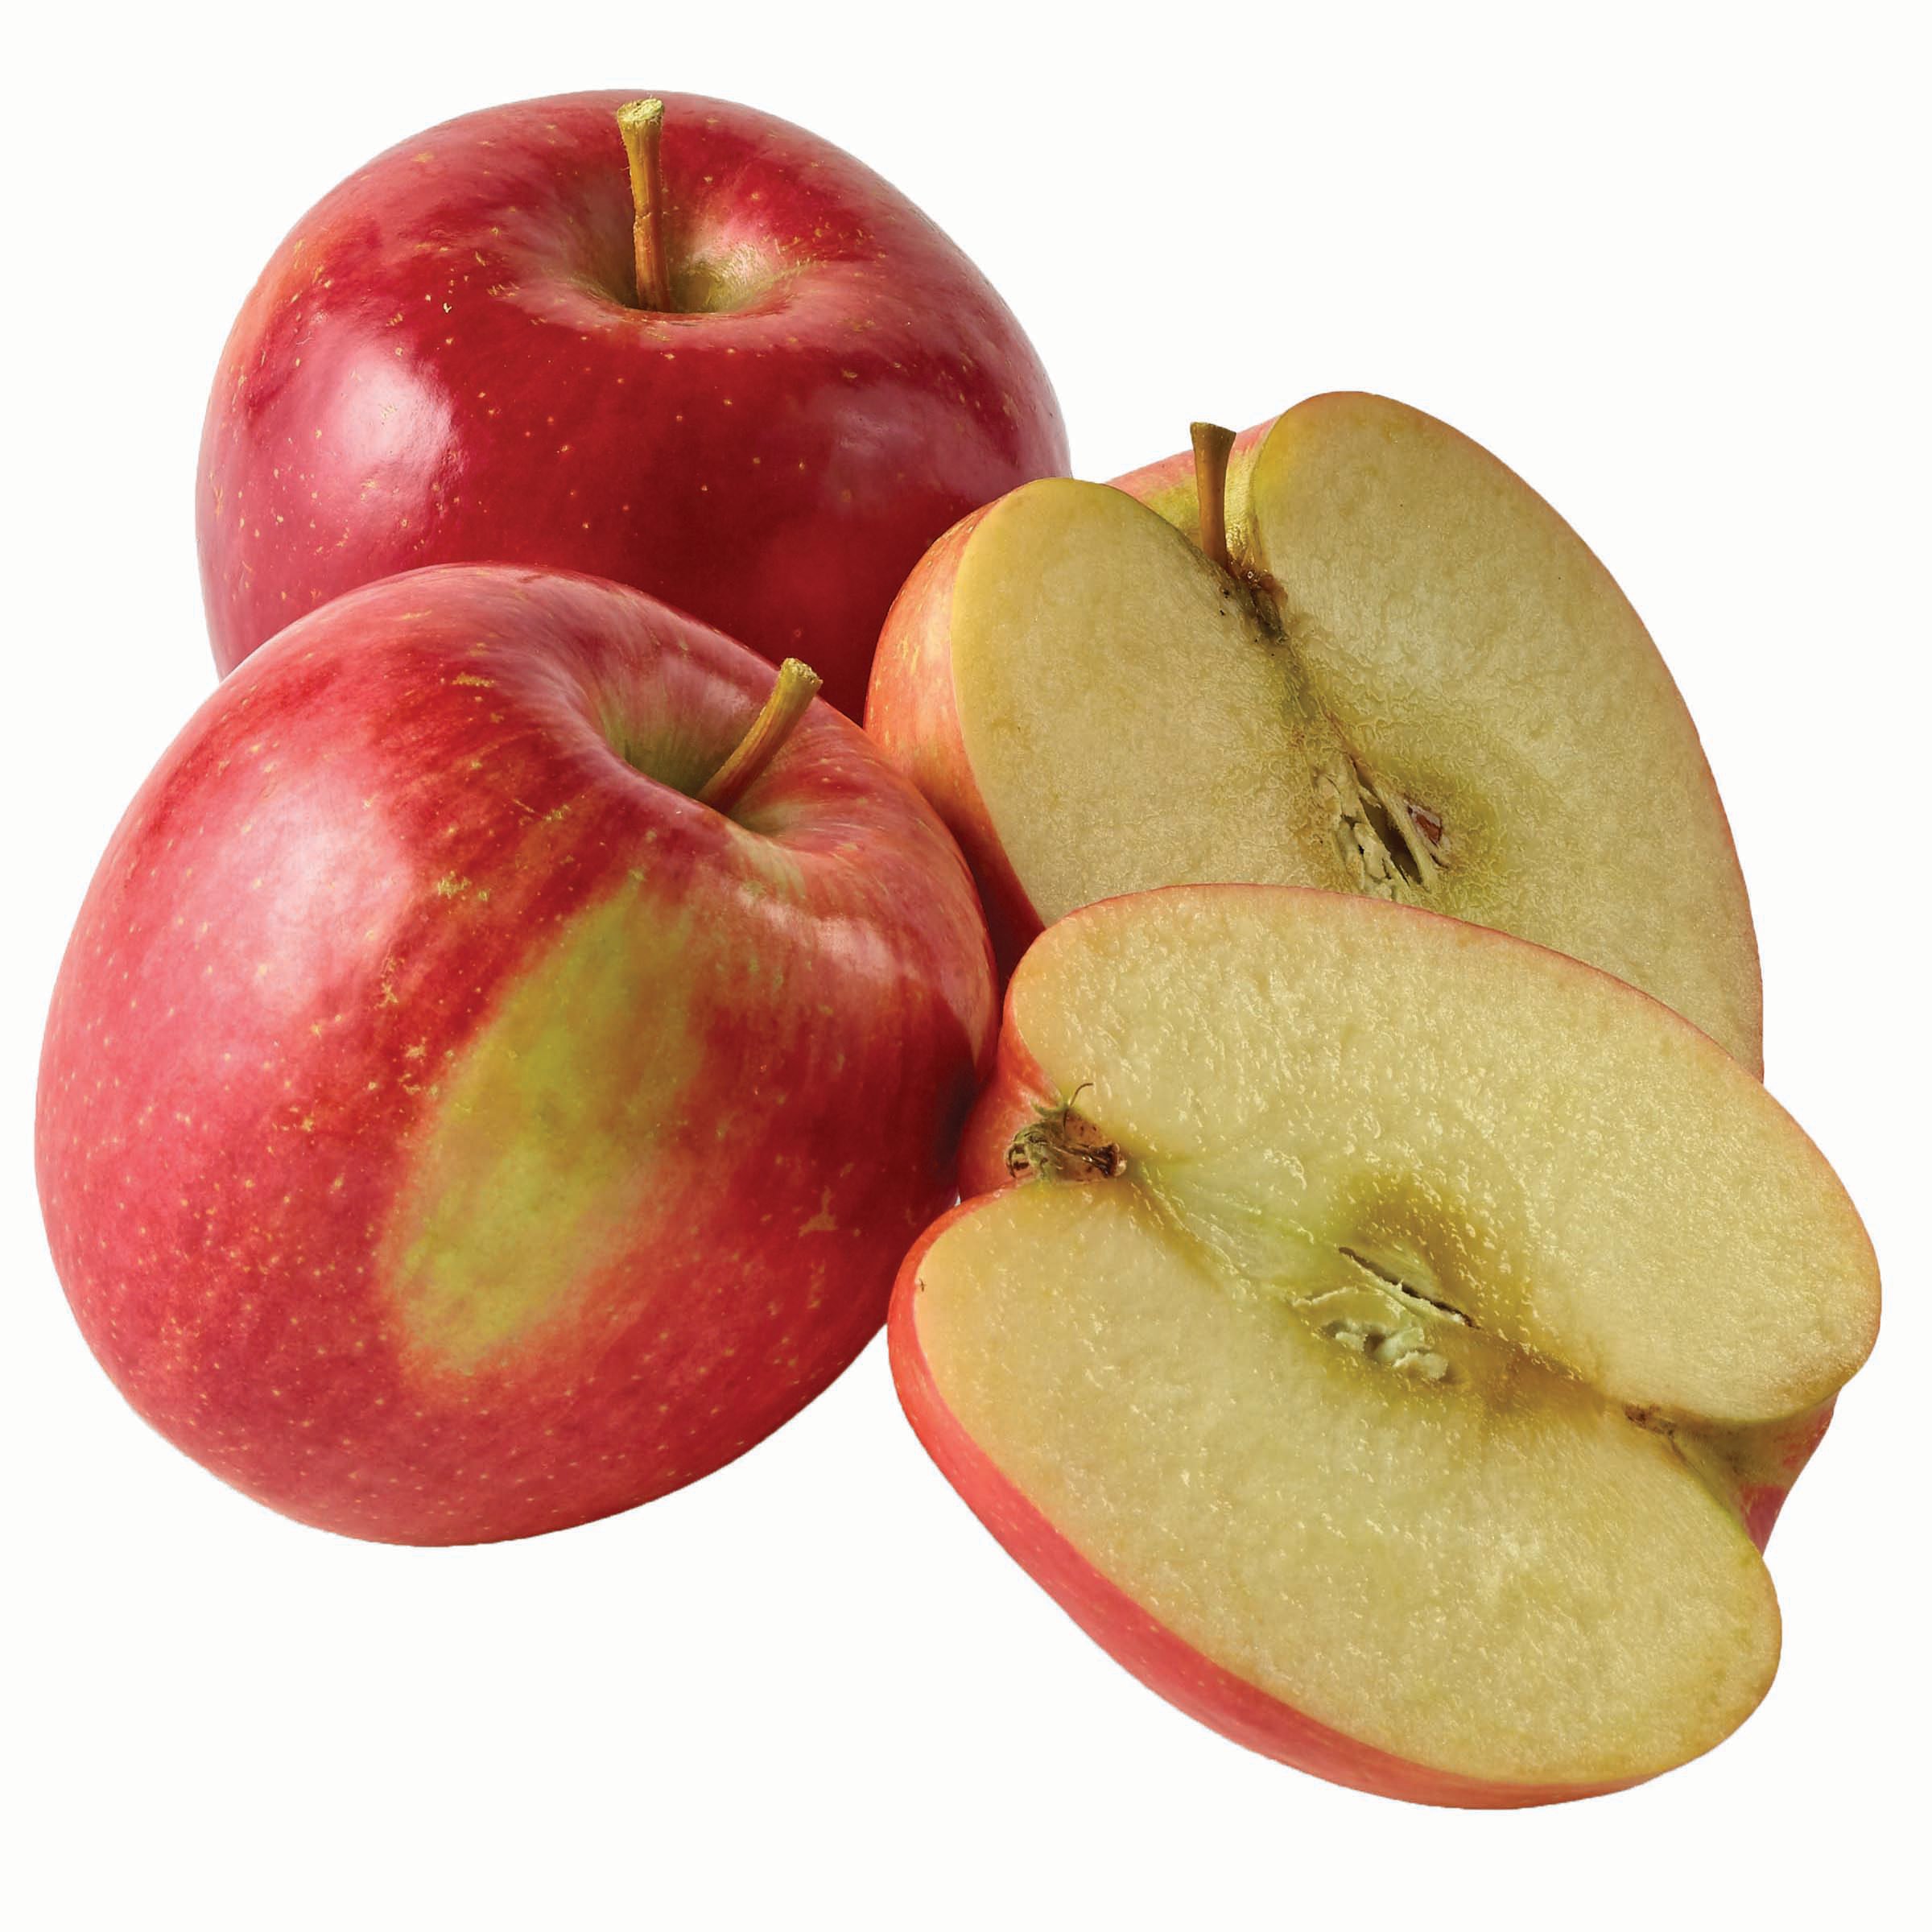 Organic Apples Fuji Information and Facts